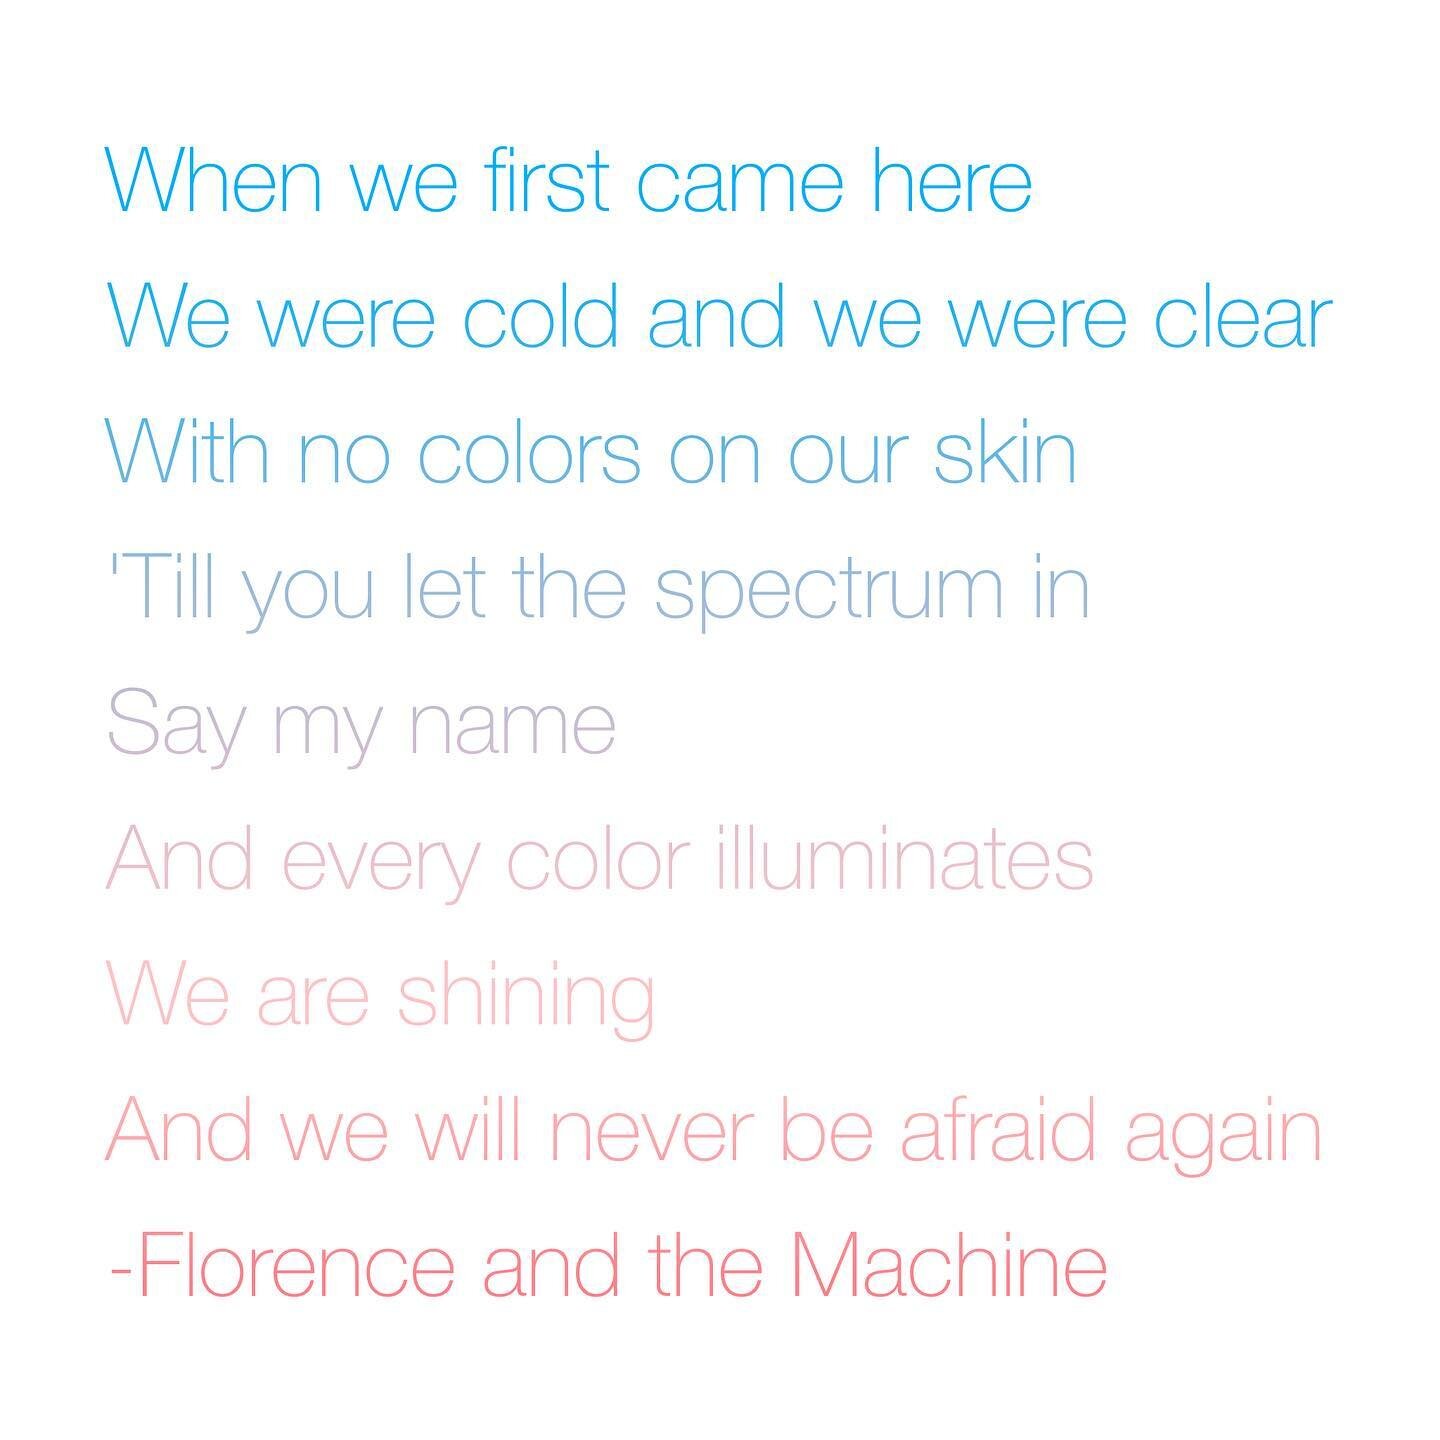 It&rsquo;s time to let the spectrum in. #florenceandthemachine #illuminate